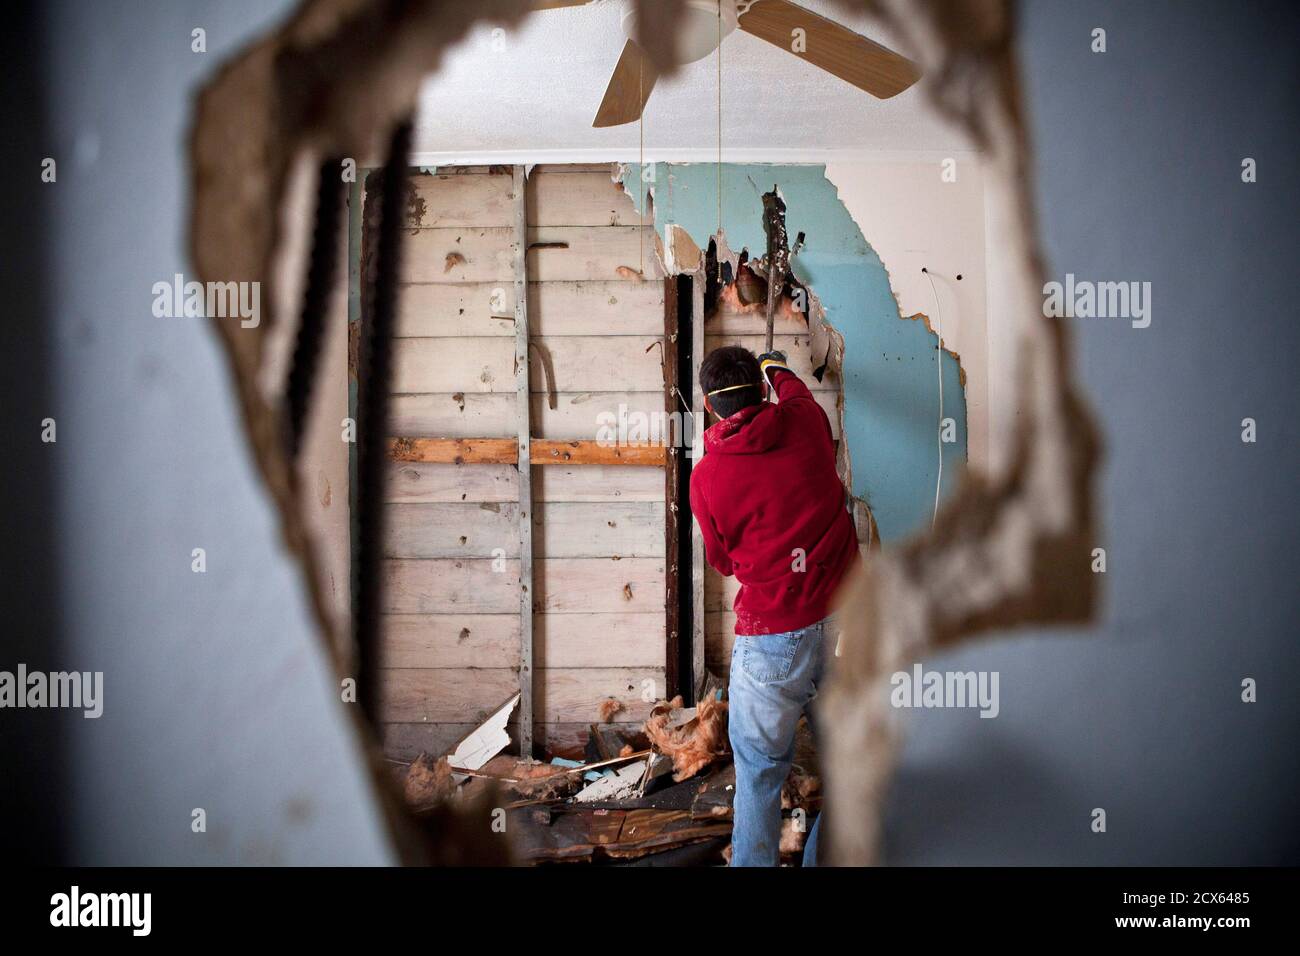 A volunteer helps tear down the dry wall of a house damaged by Hurricane  Sandy in the Midland Beach neighbourhood of Staten Island, New York  November 9, 2012. REUTERS/Andrew Burton (UNITED STATES -